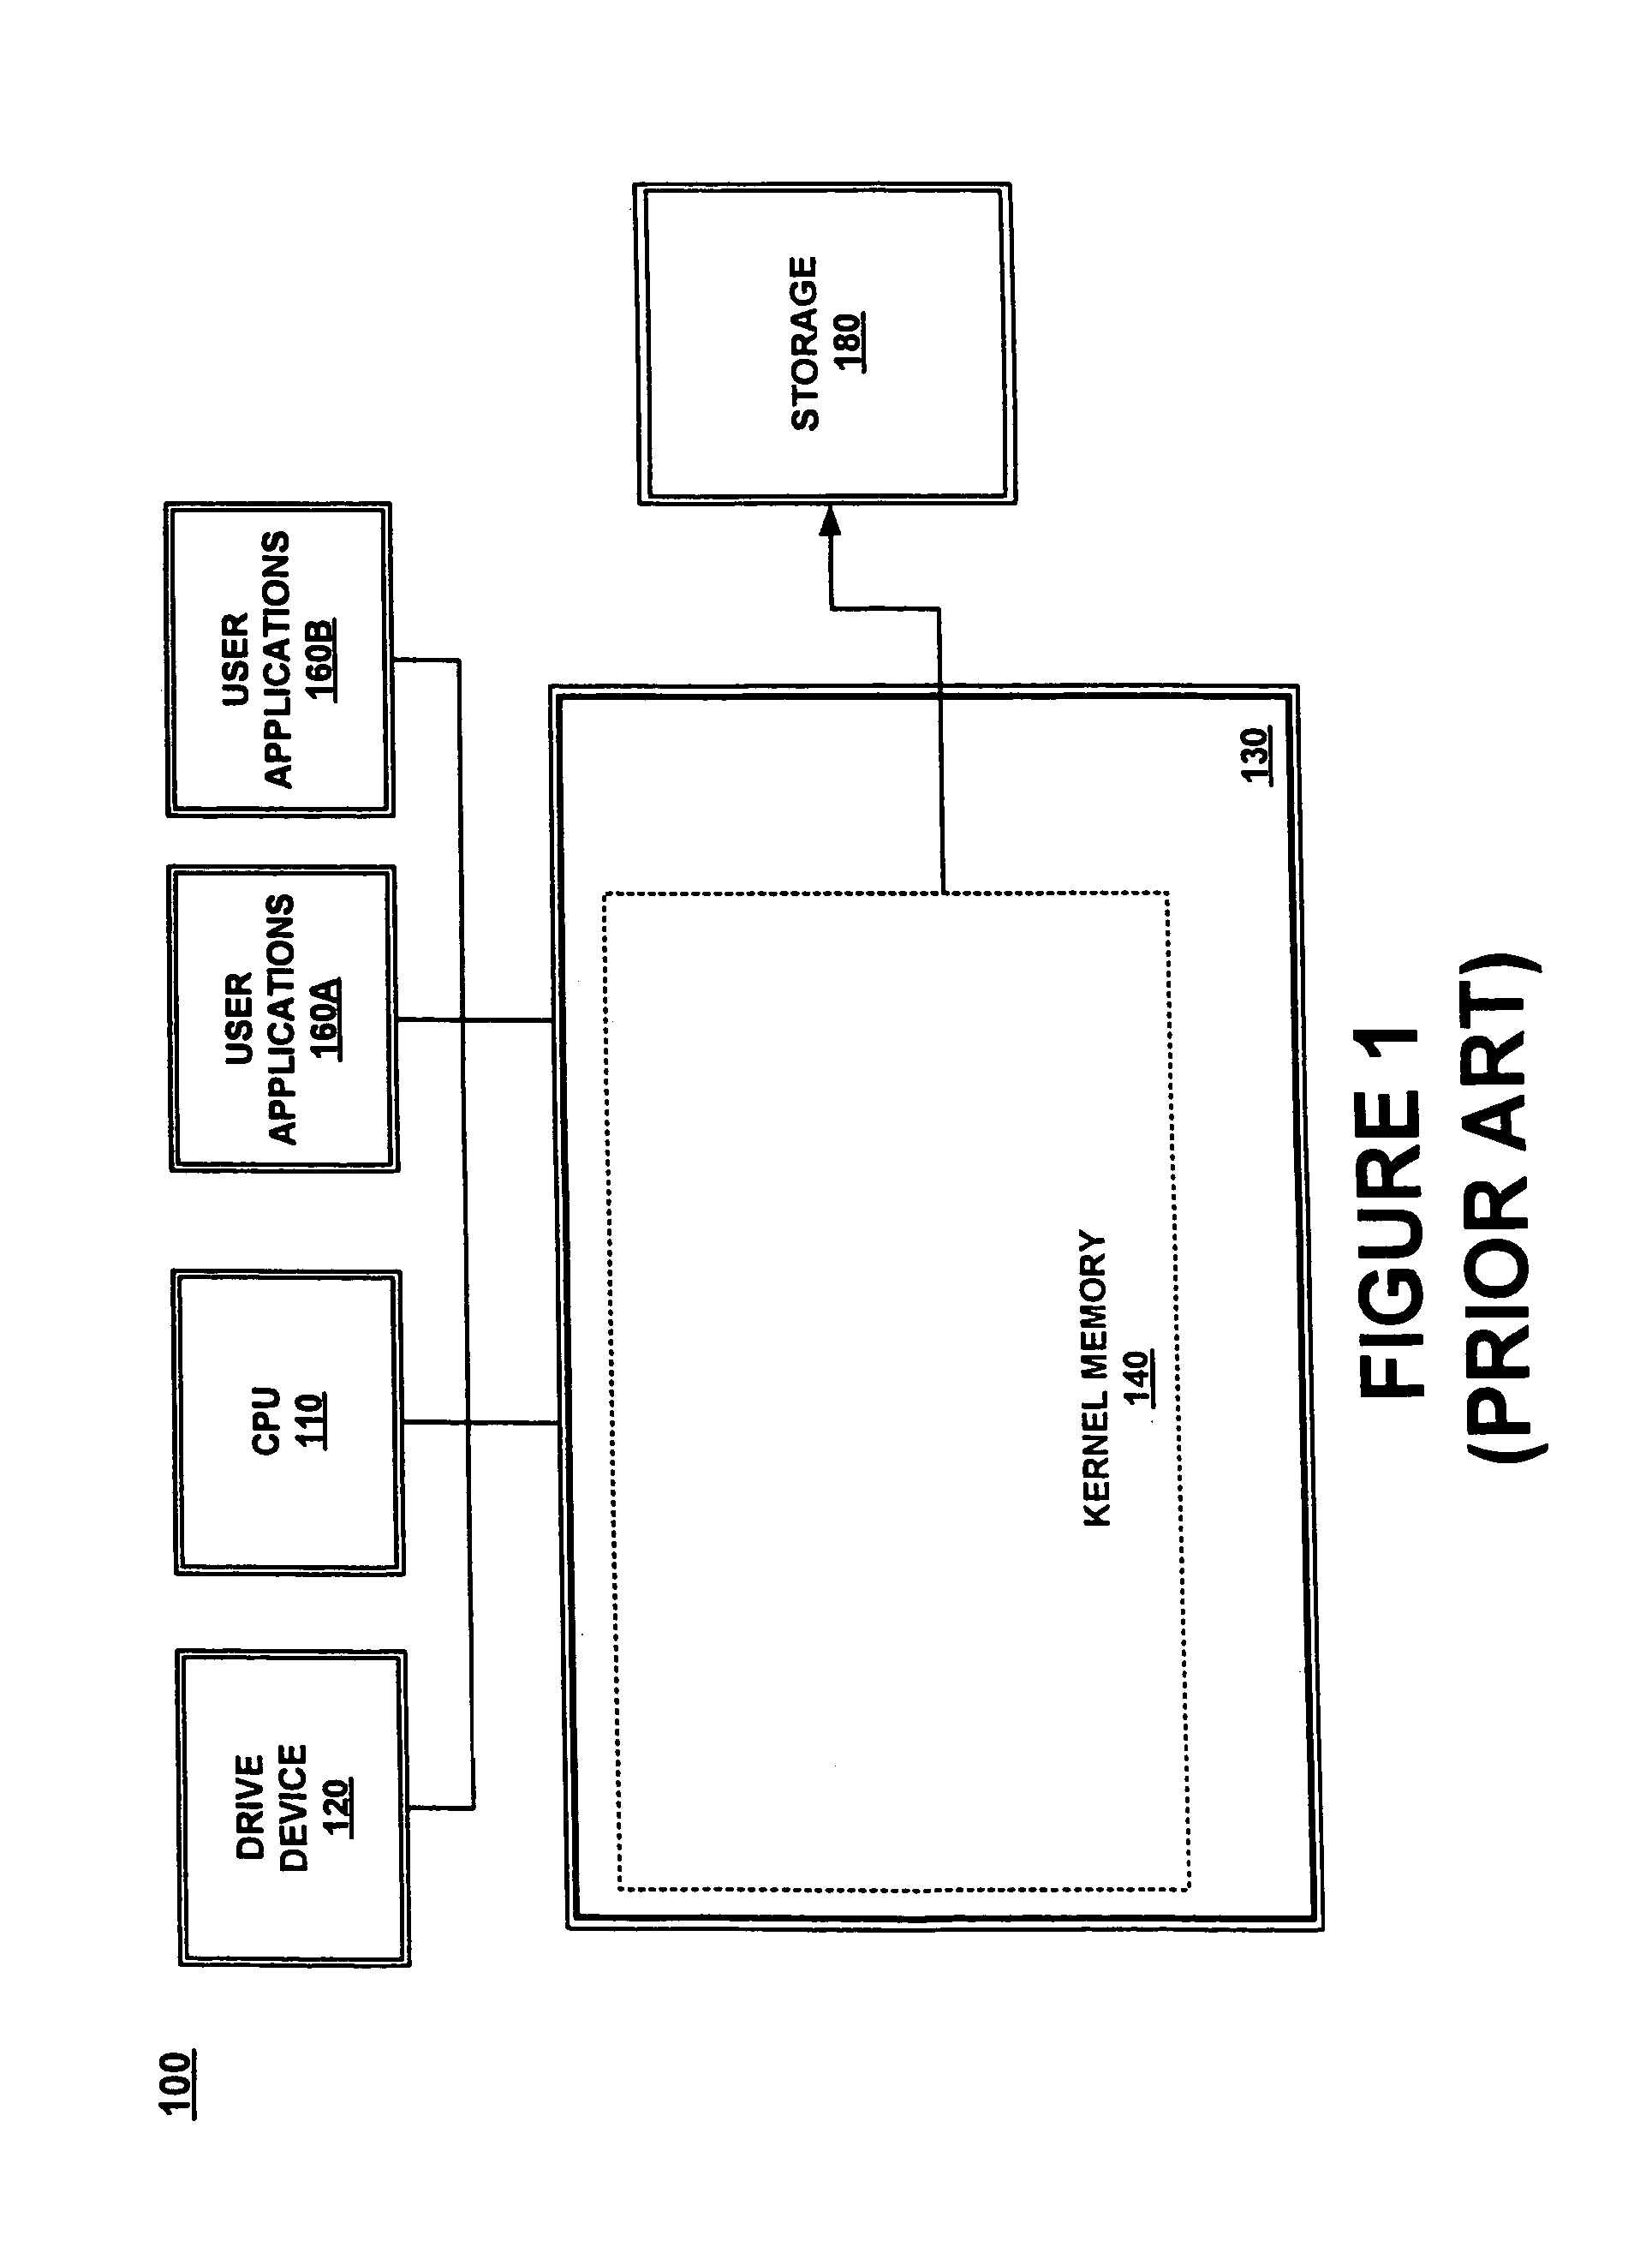 Method and system for event publication and subscription with an event channel from user level and kernel level